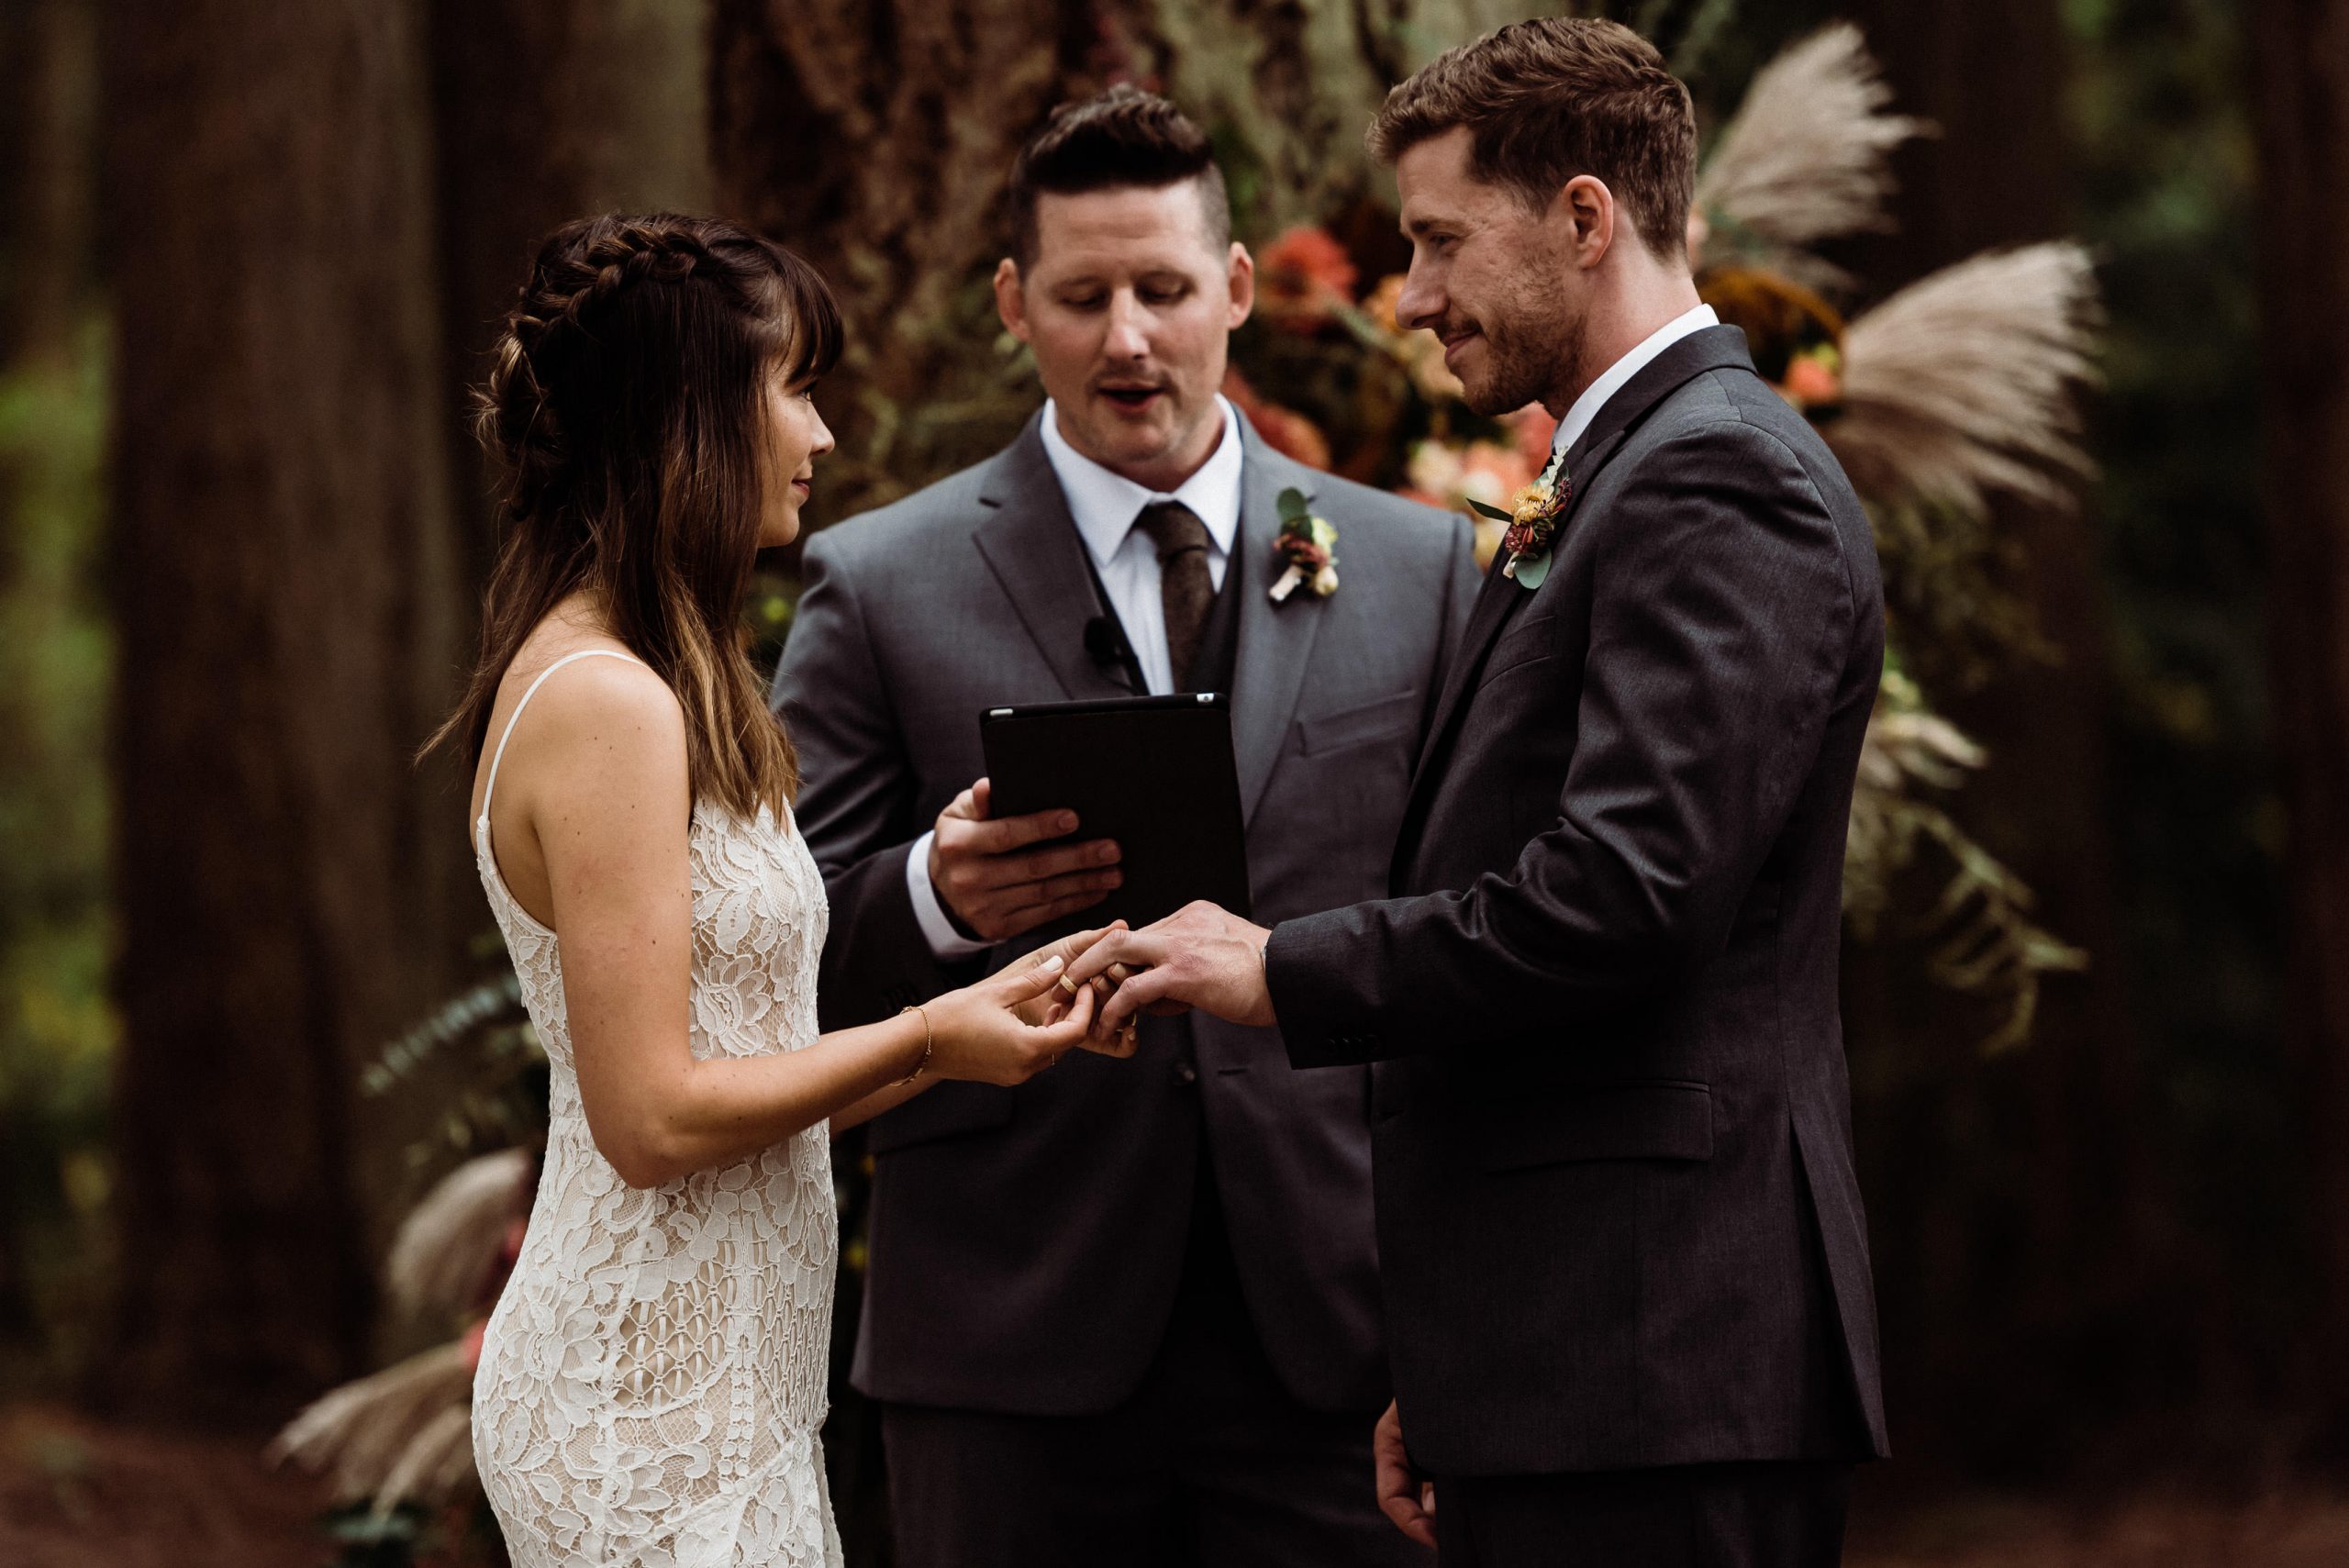 There are so many reasons to get married outdoor in the thick of nature like this couple exchanging rings during their forest wedding.